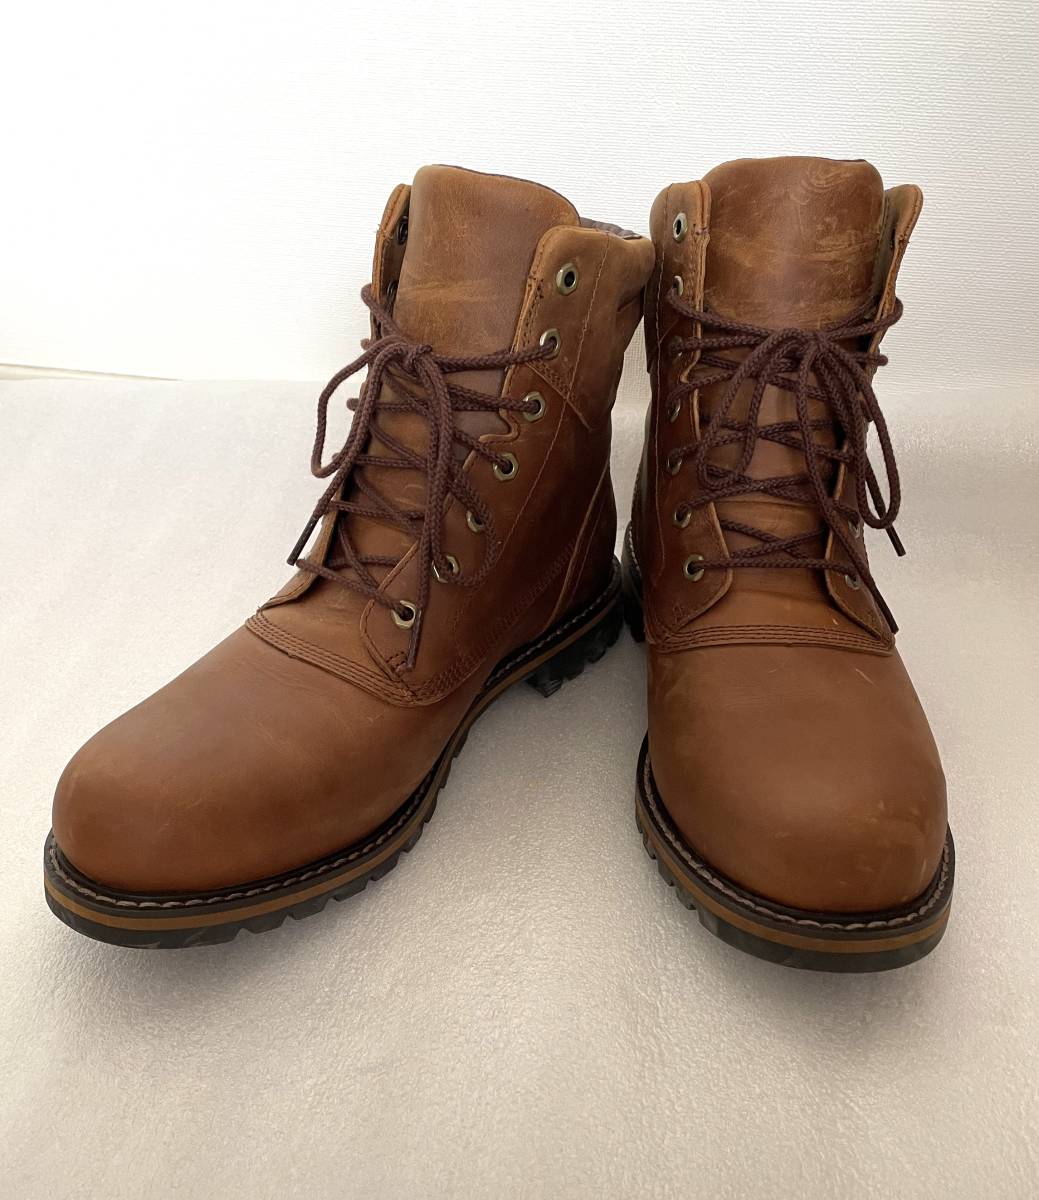 verkoper Kietelen kin ティンバーランド Timberland US 8.5W (26.5cm) プレーントゥブーツ A16H9 メンズ 防水 ウォータープルーフ ブラウン  本革 product details | Proxy bidding and ordering service for auctions and  shopping within Japan and the United States - Get